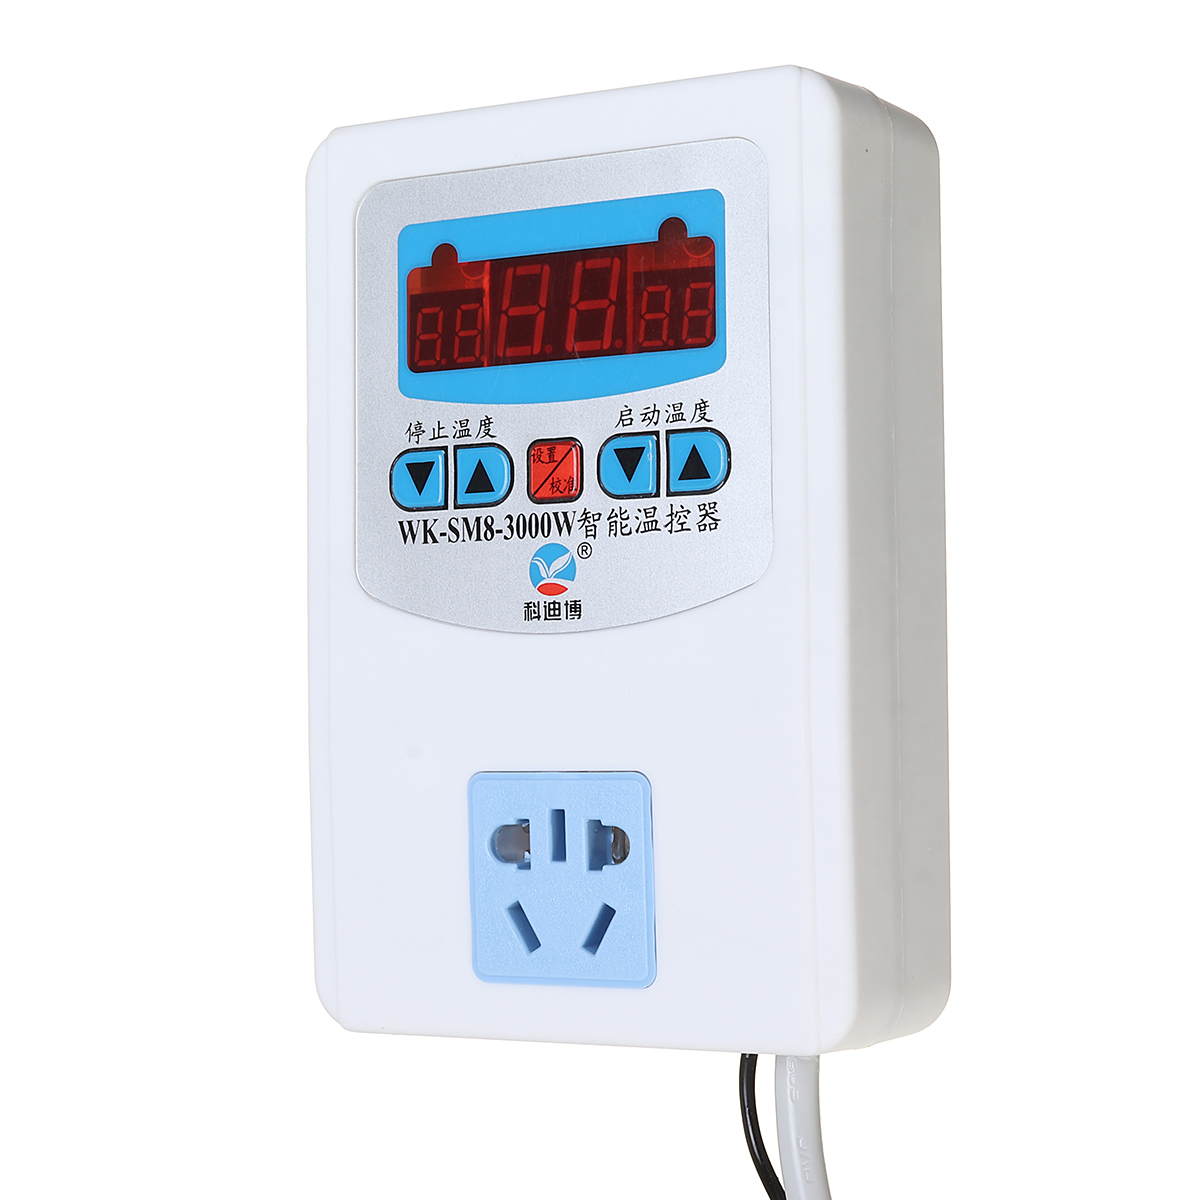 Find WK SM8 3000W Smart Thermostat Digital Display Microcomputer Intelligent Thermostat Temperature Controller for Sale on Gipsybee.com with cryptocurrencies